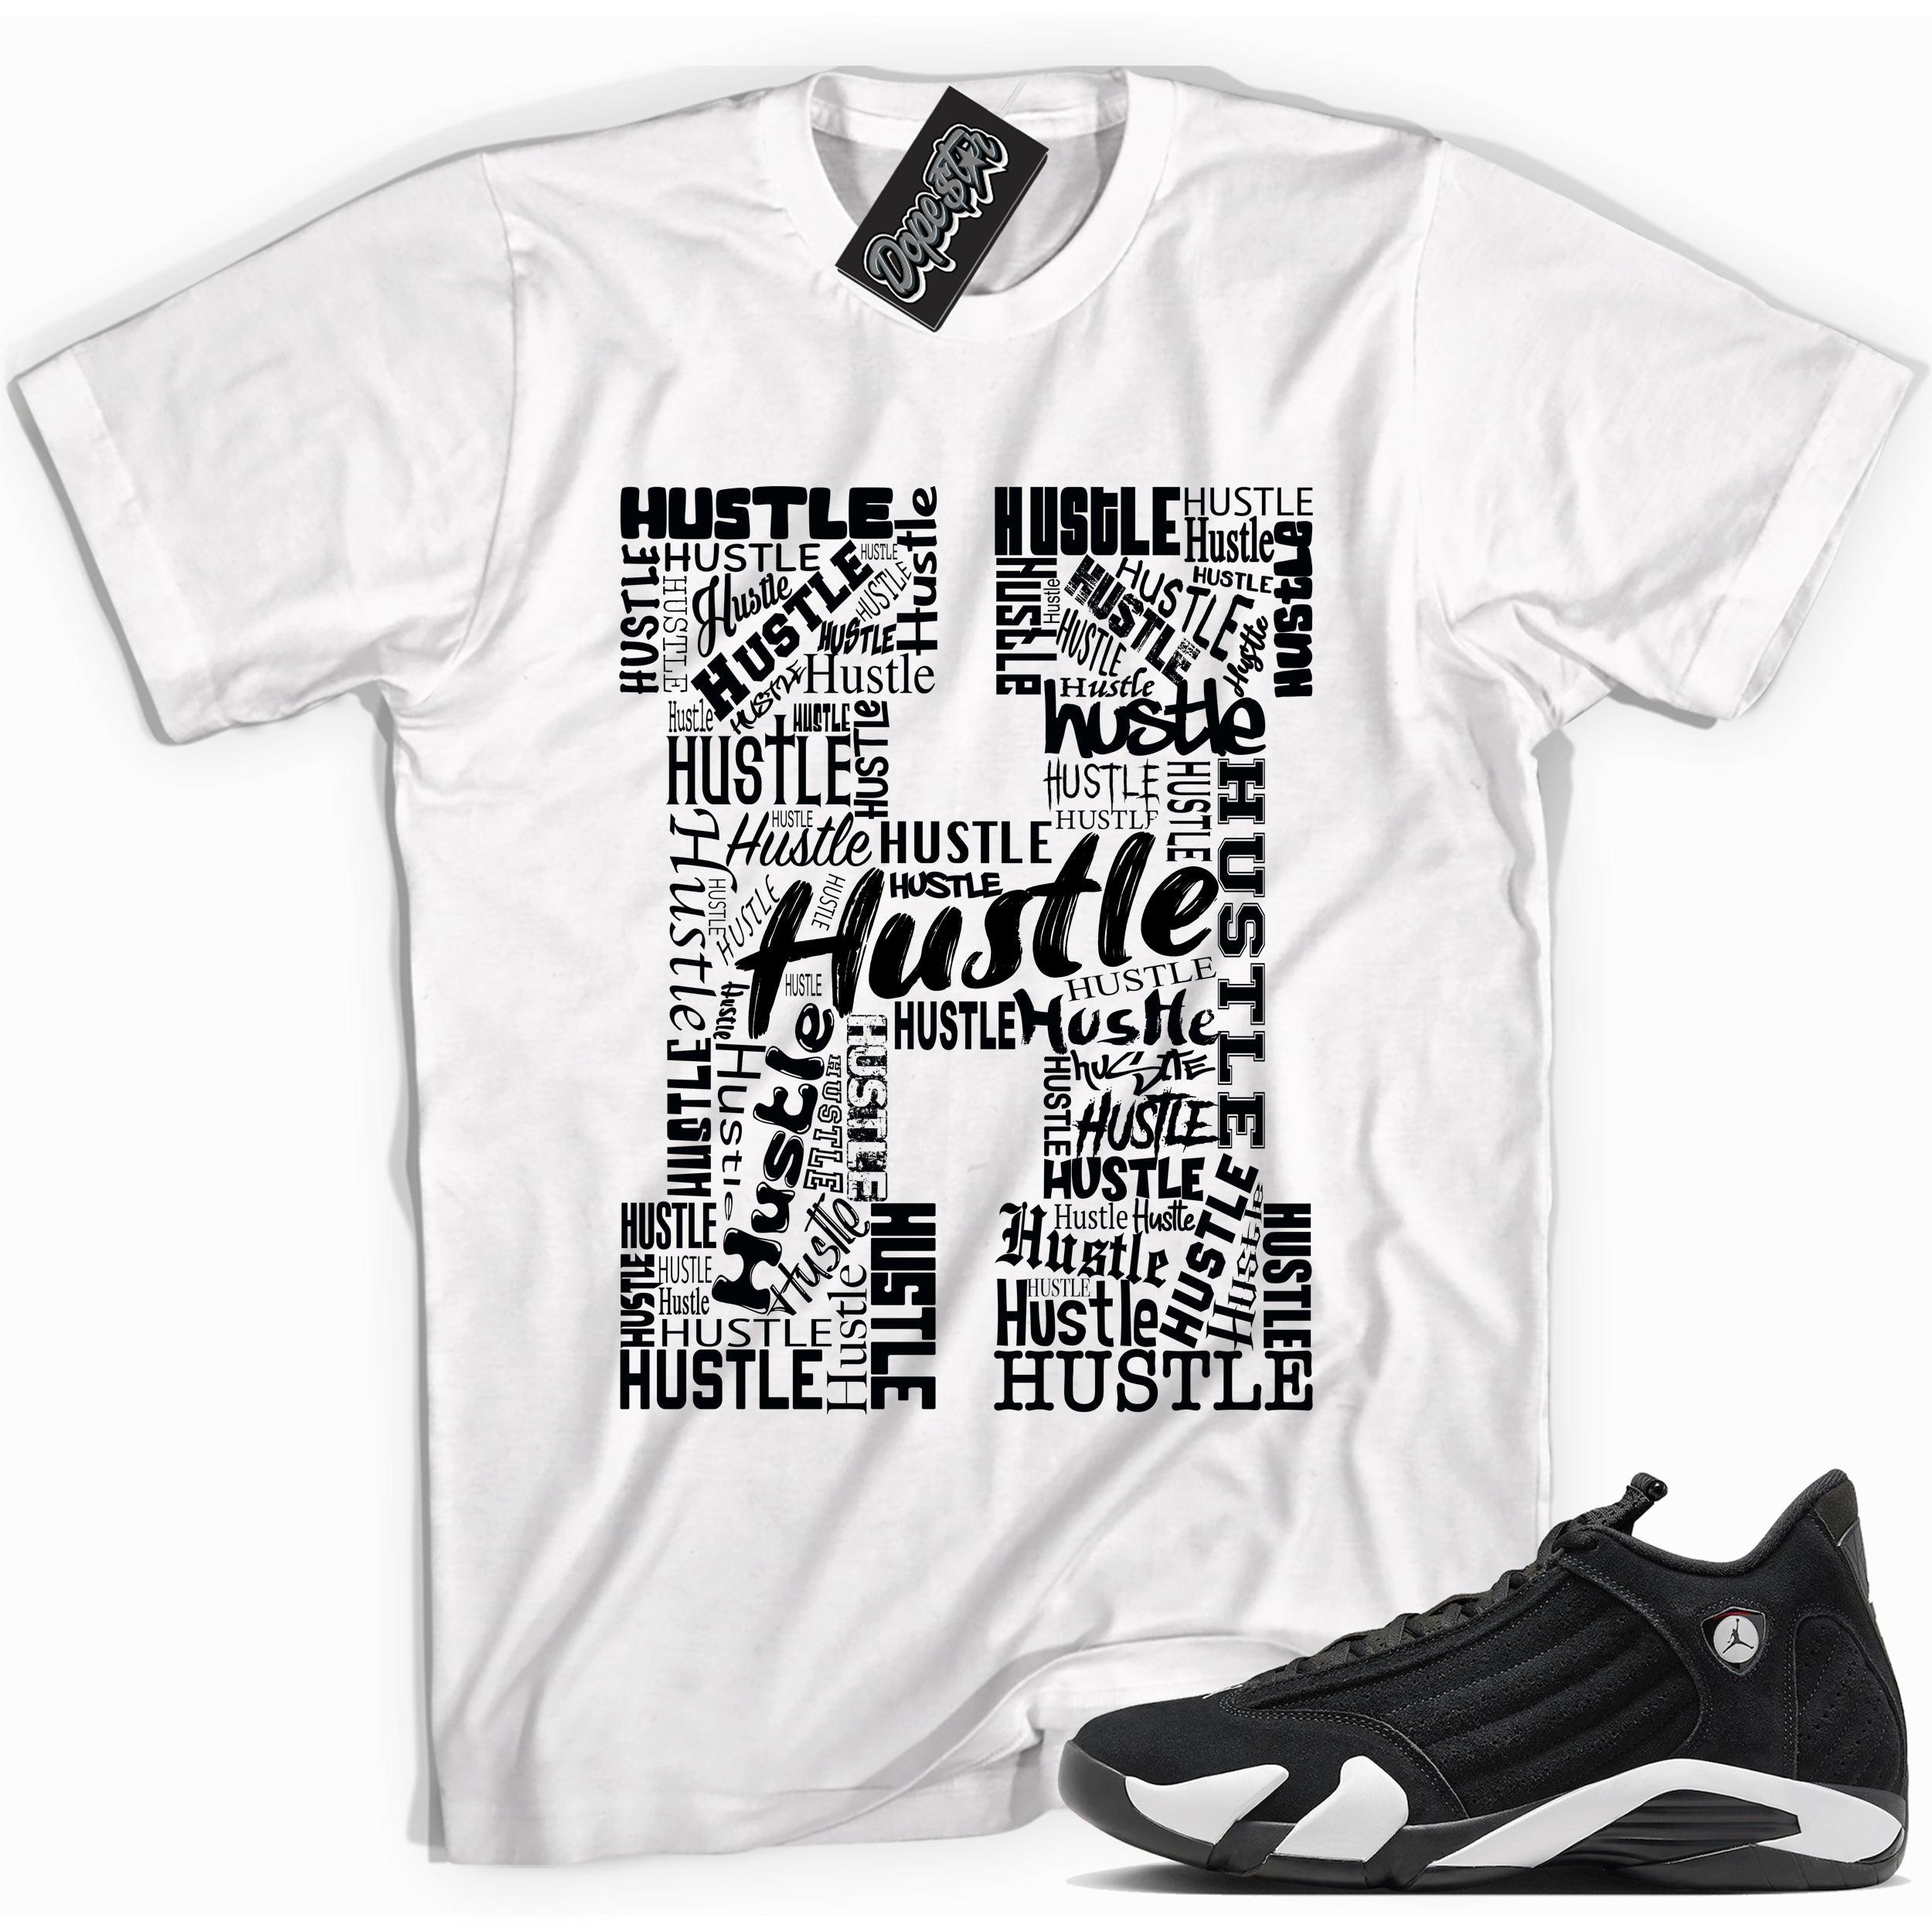 Cool White graphic tee with “ Hustle H ” print, that perfectly matches Air Jordan 14 Black & White sneakers 